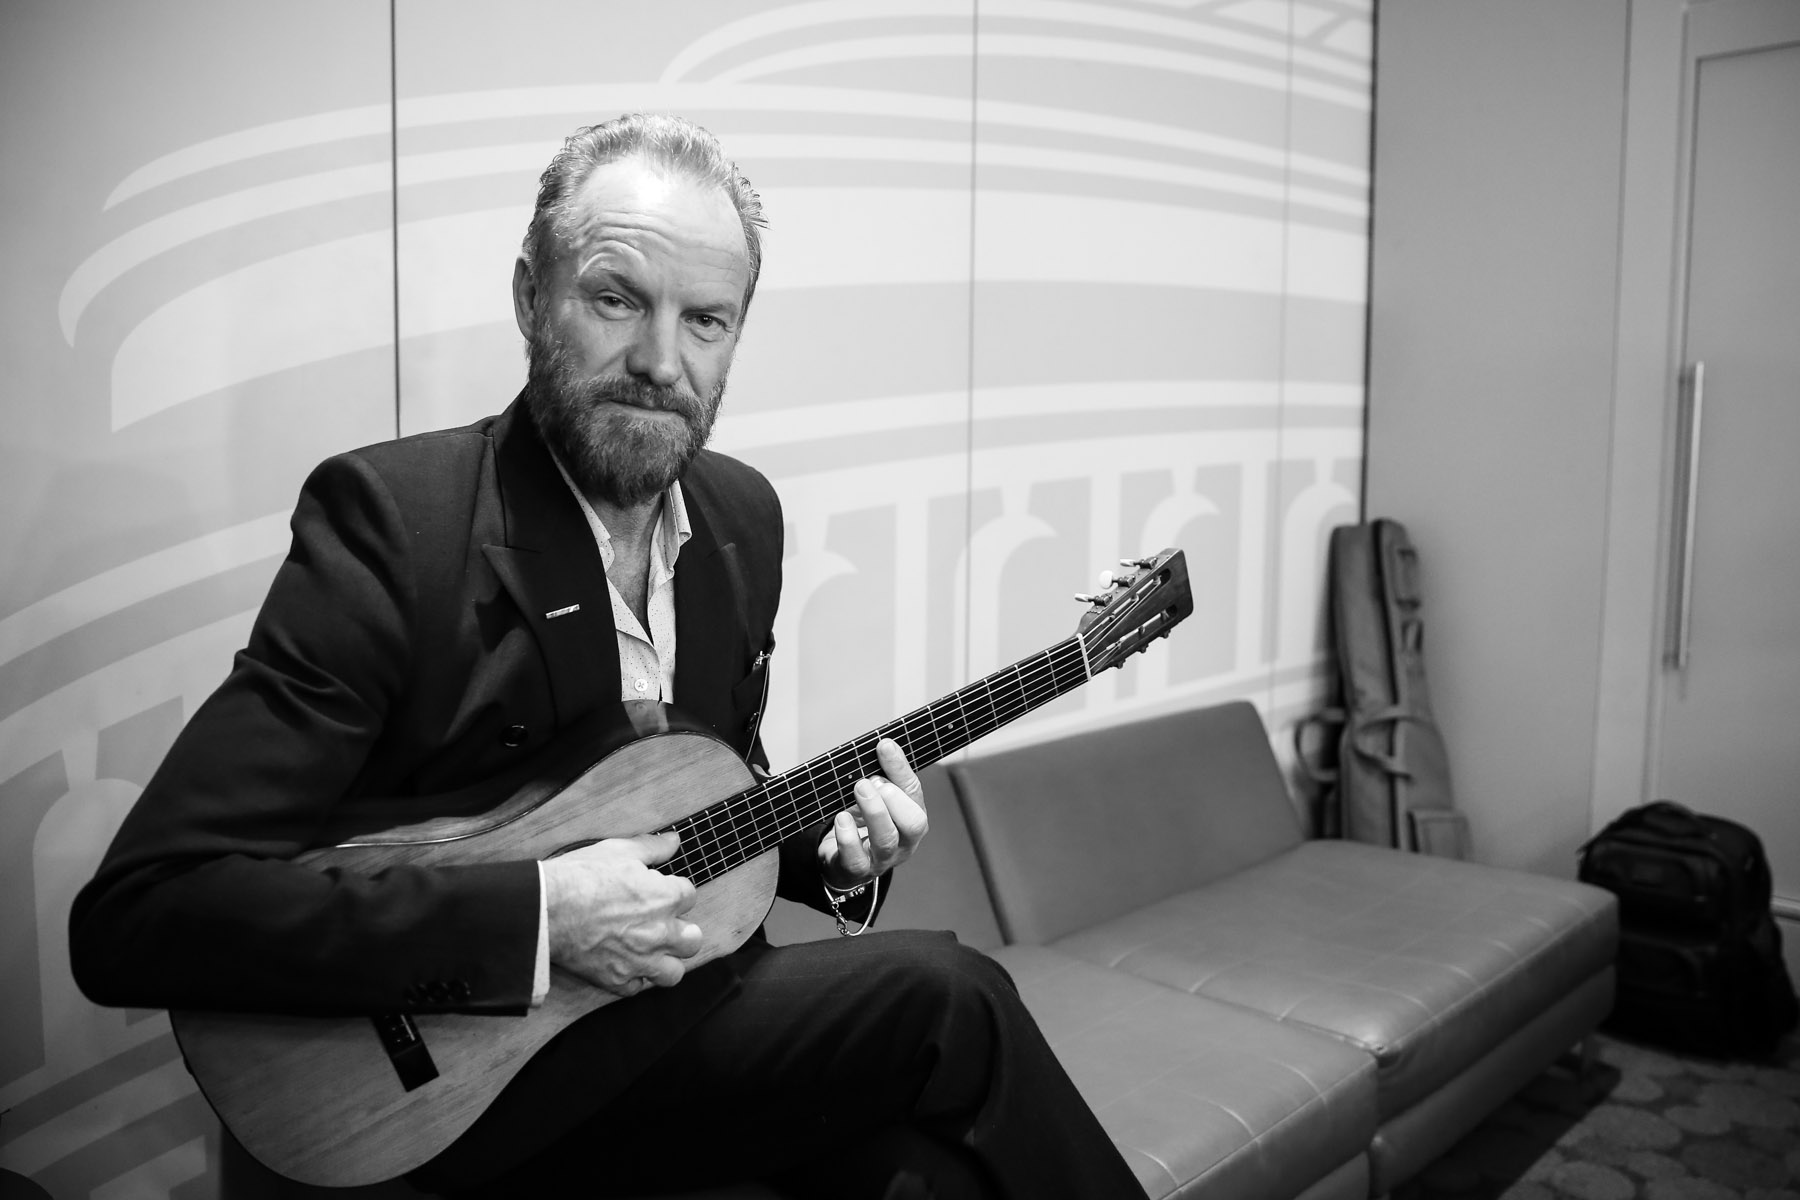 Sting backstage at the Royal Albert Hall by Christie Goodwin